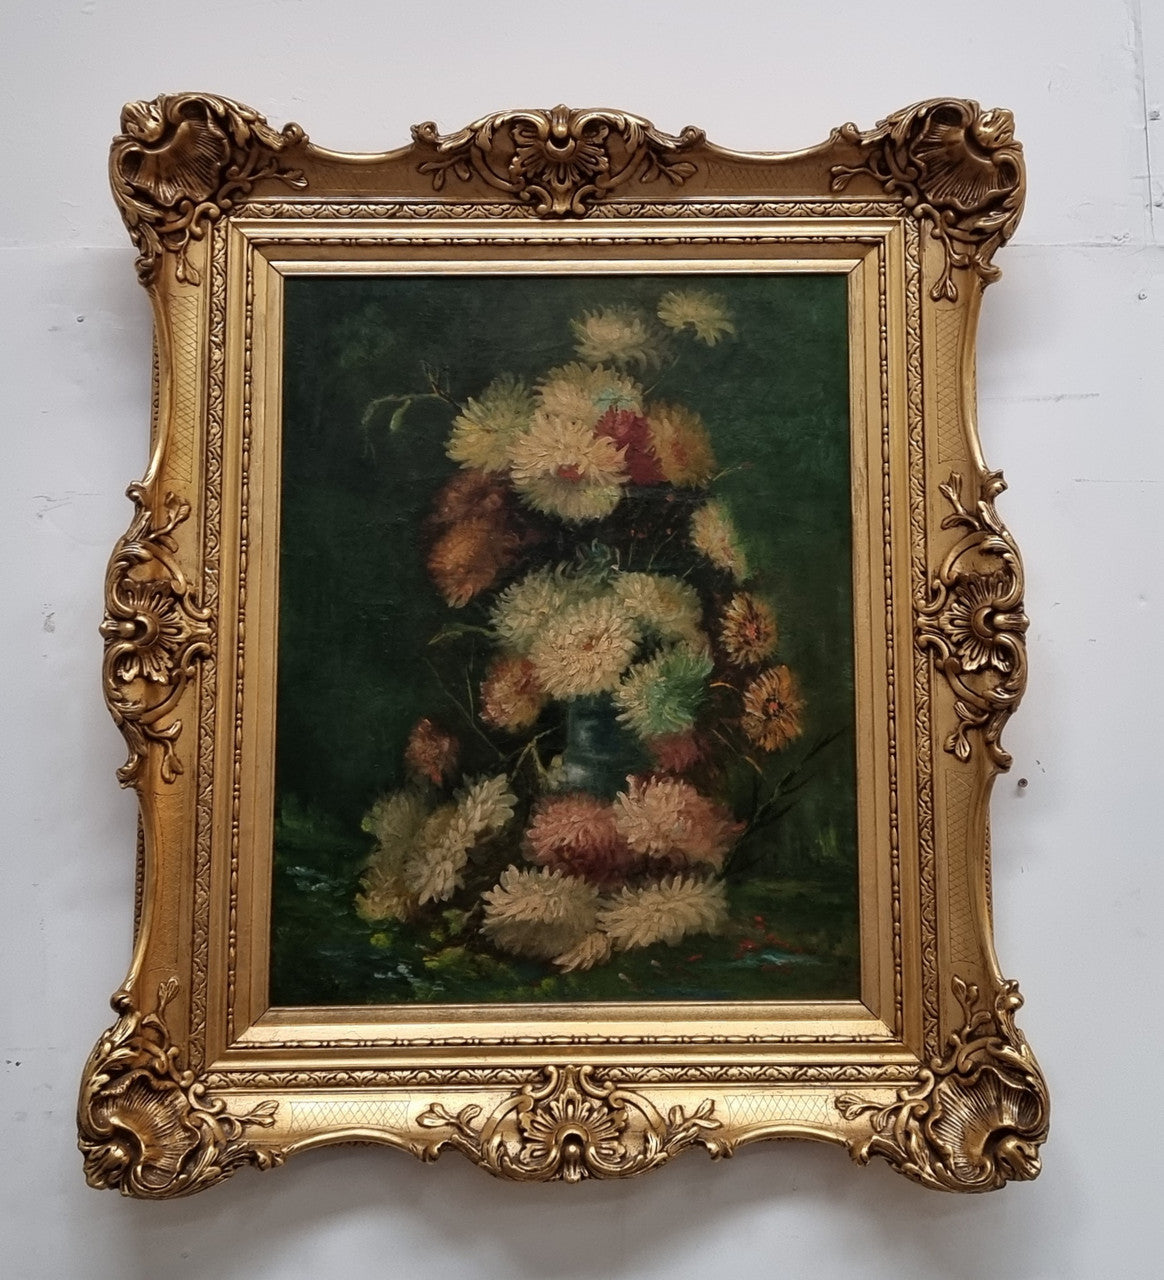 Beautifully framed moody floral oil painting on canvas of Chrysanthemum flowers in a vase with a ornate gilt frame. In good original condition.